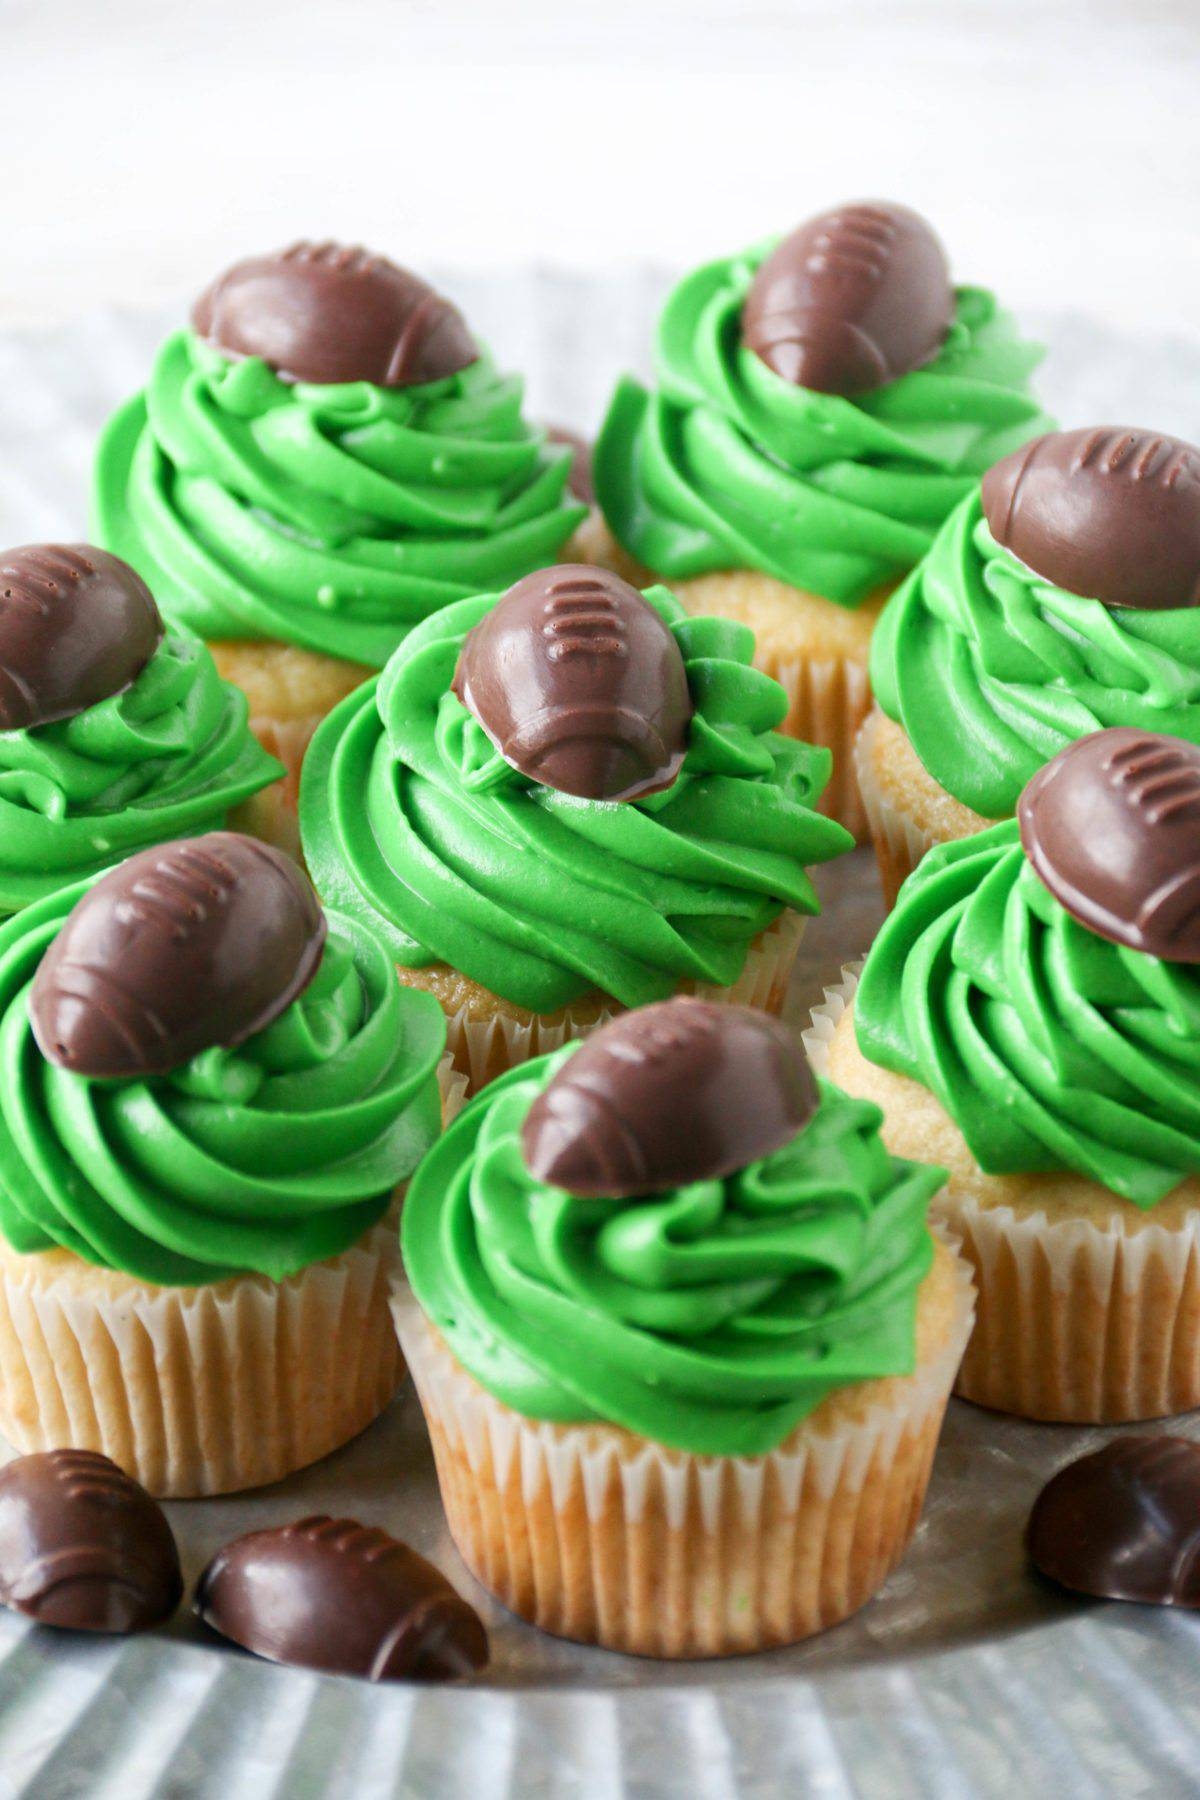 vanilla cupcakess with green frosting and topped with chocolate footballs